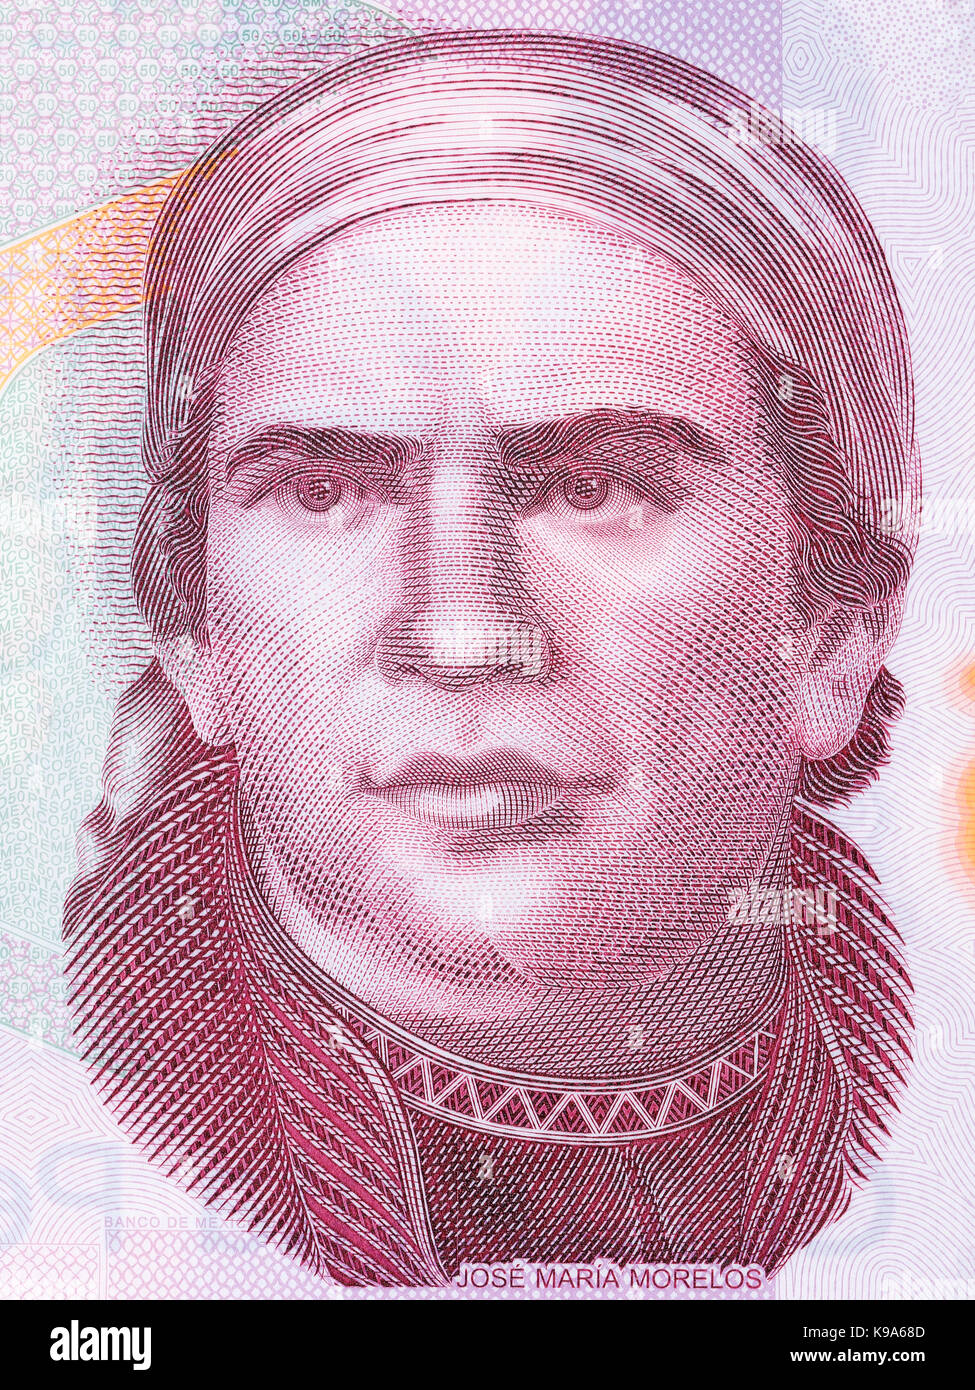 Jose Maria Morelos portrait from Mexican money Stock Photo - Alamy